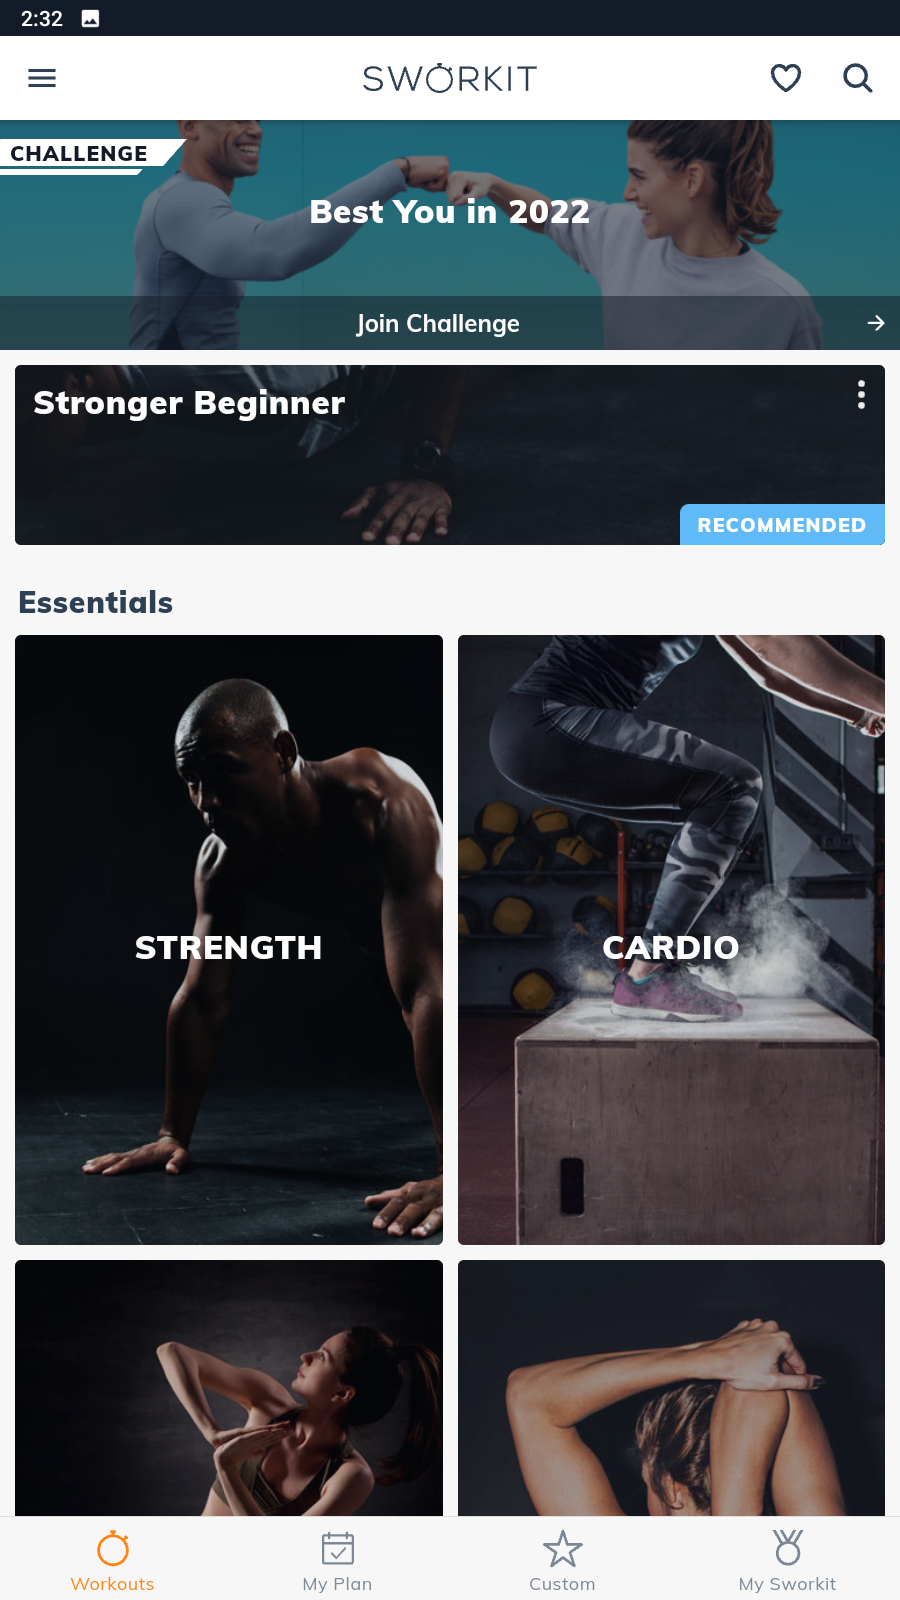 Sworkit's workout library